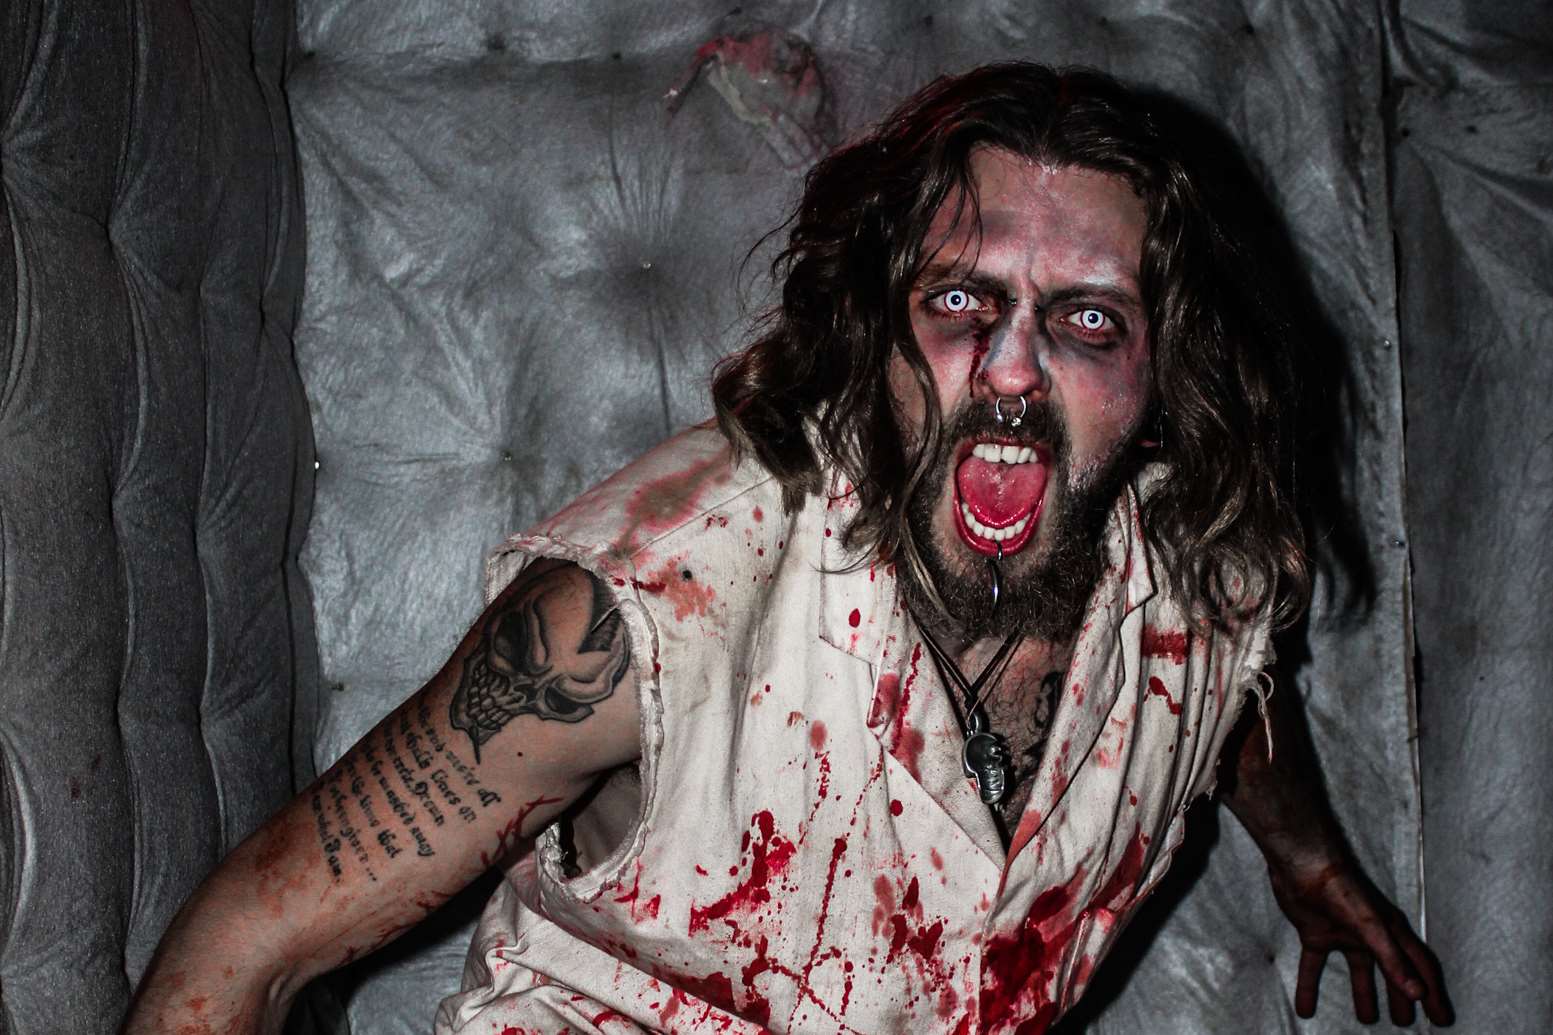 Fort Amherst promises plenty of frights this Halloween